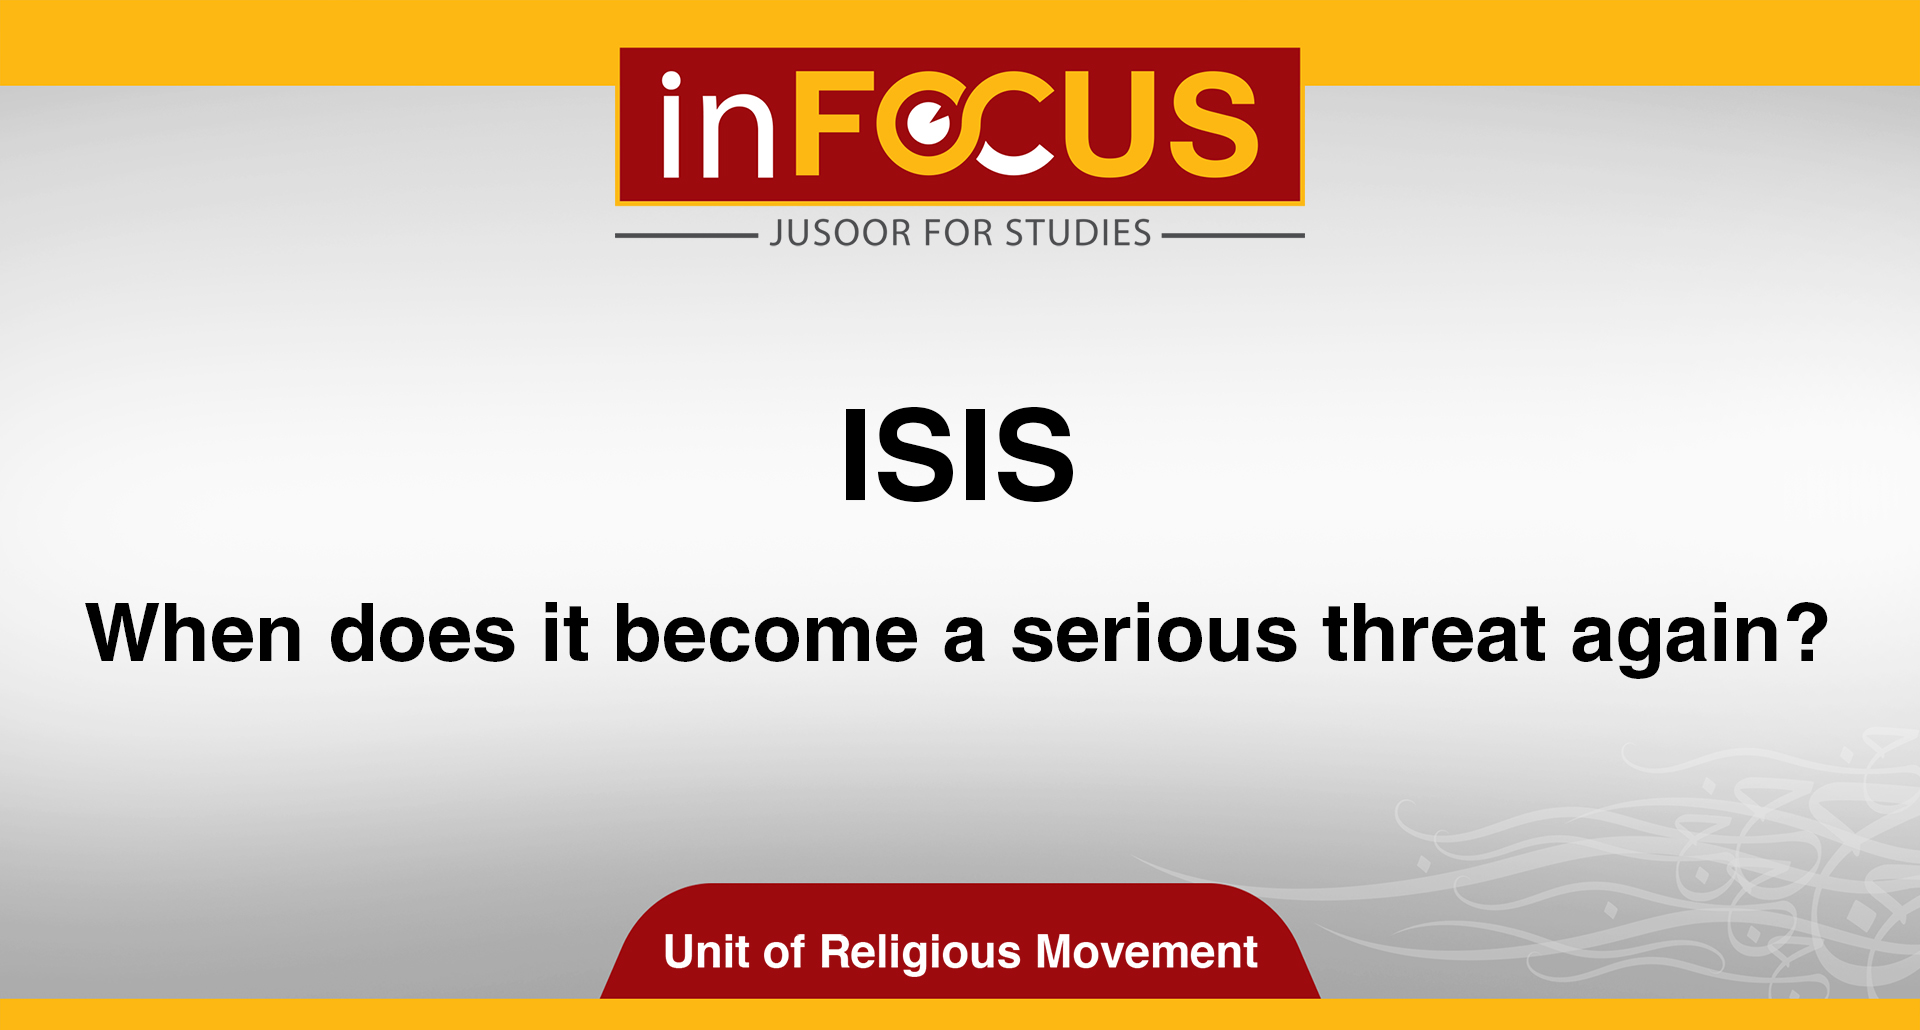 ISIS: When does it become a serious threat again?